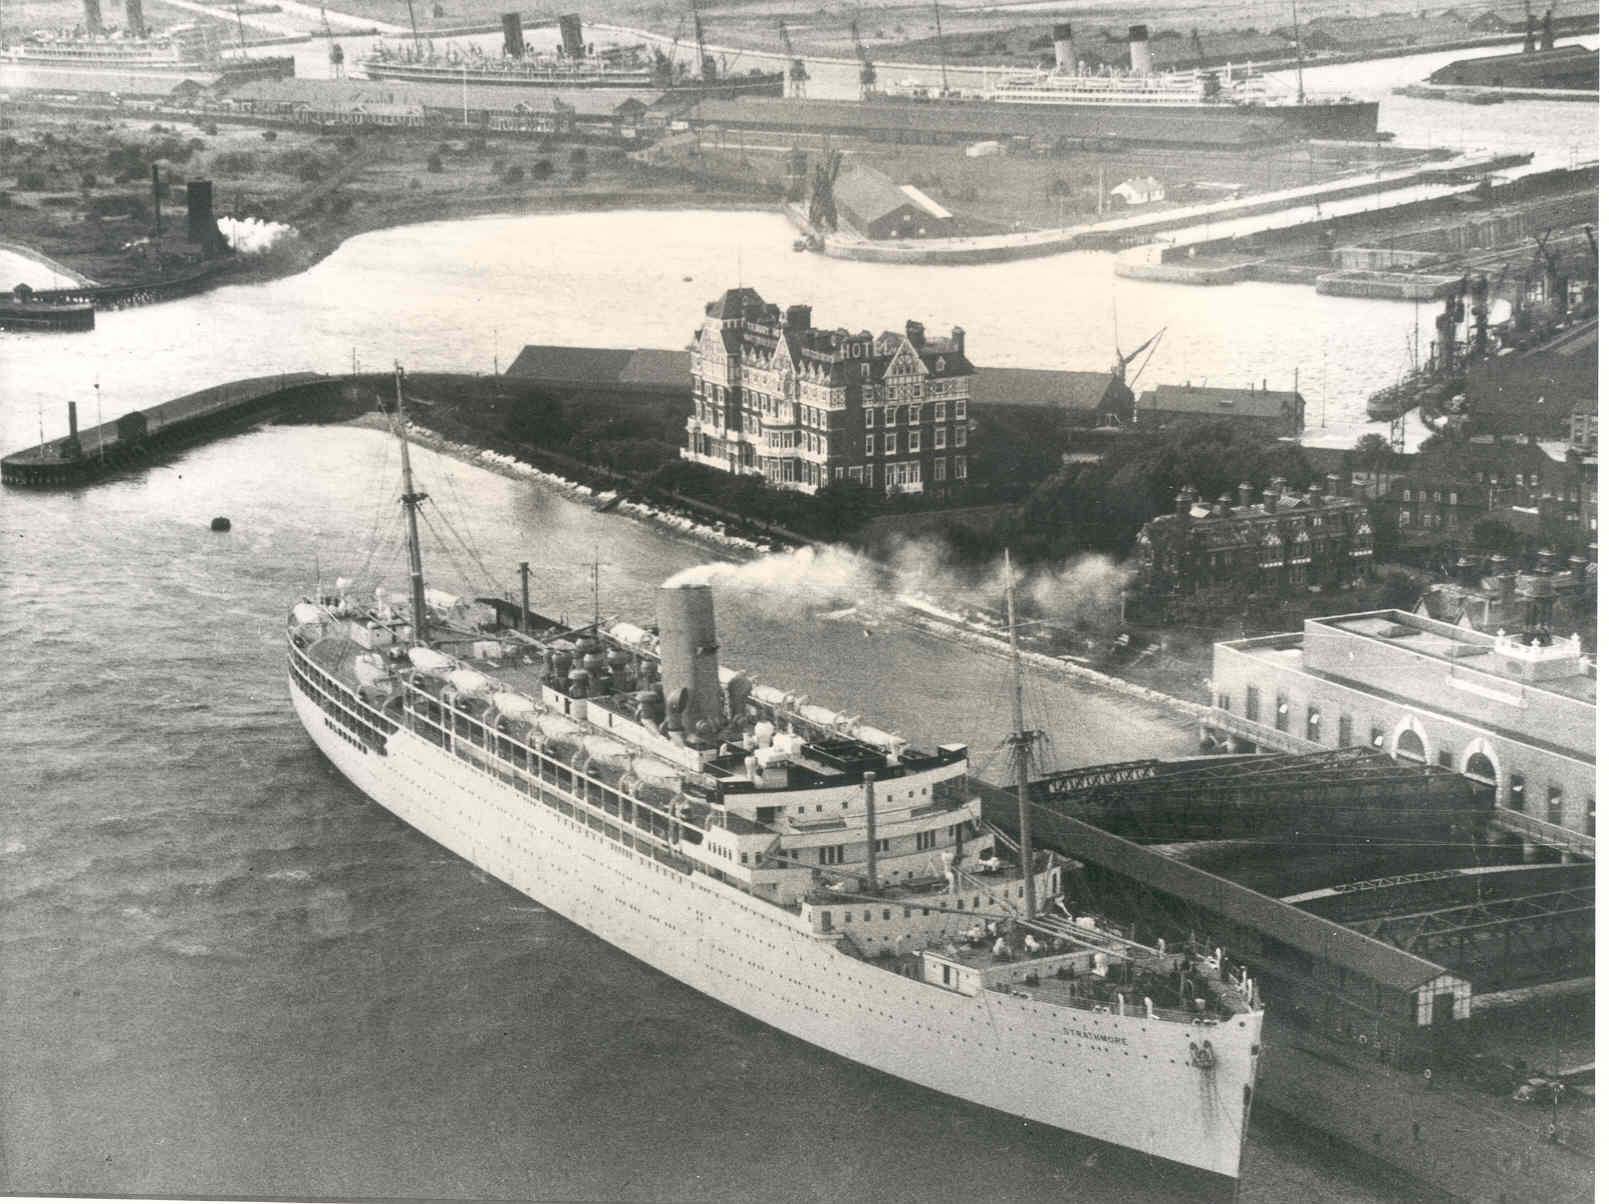 Built by Vickers-Armstrong Ltd, Barrow-In-Furness, England.  Launched on 4 April 1935 by the Duchess Of York and completed in September 1935, made her inaugural voyage on 27 September 1935 from London - Canary Islands.
Base Port - London
Gross Tonnage: 